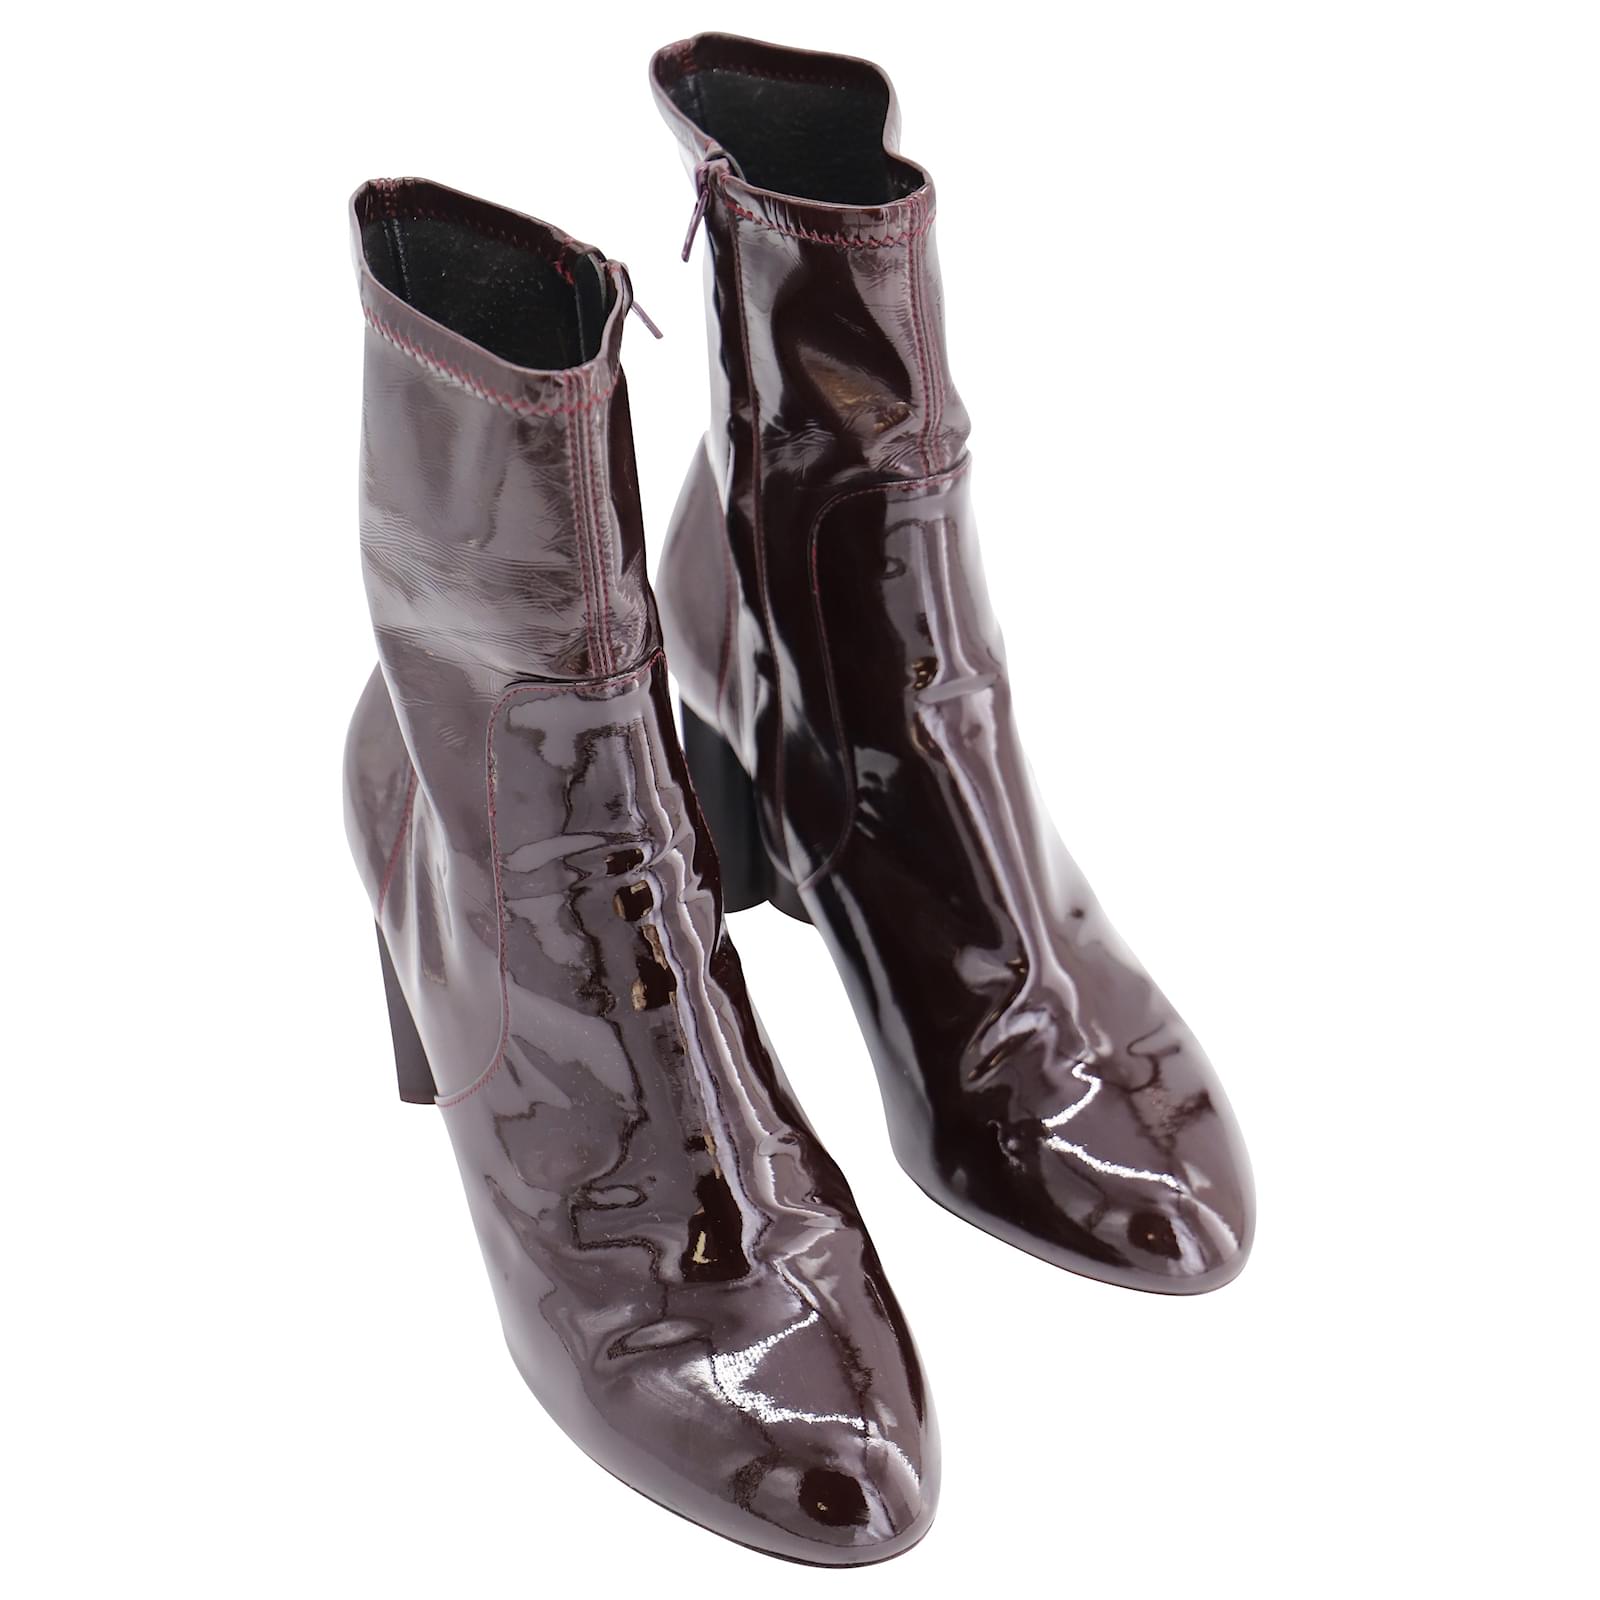 Louis Vuitton 100mm Silhouette Ankle Boots in Burgundy Patent